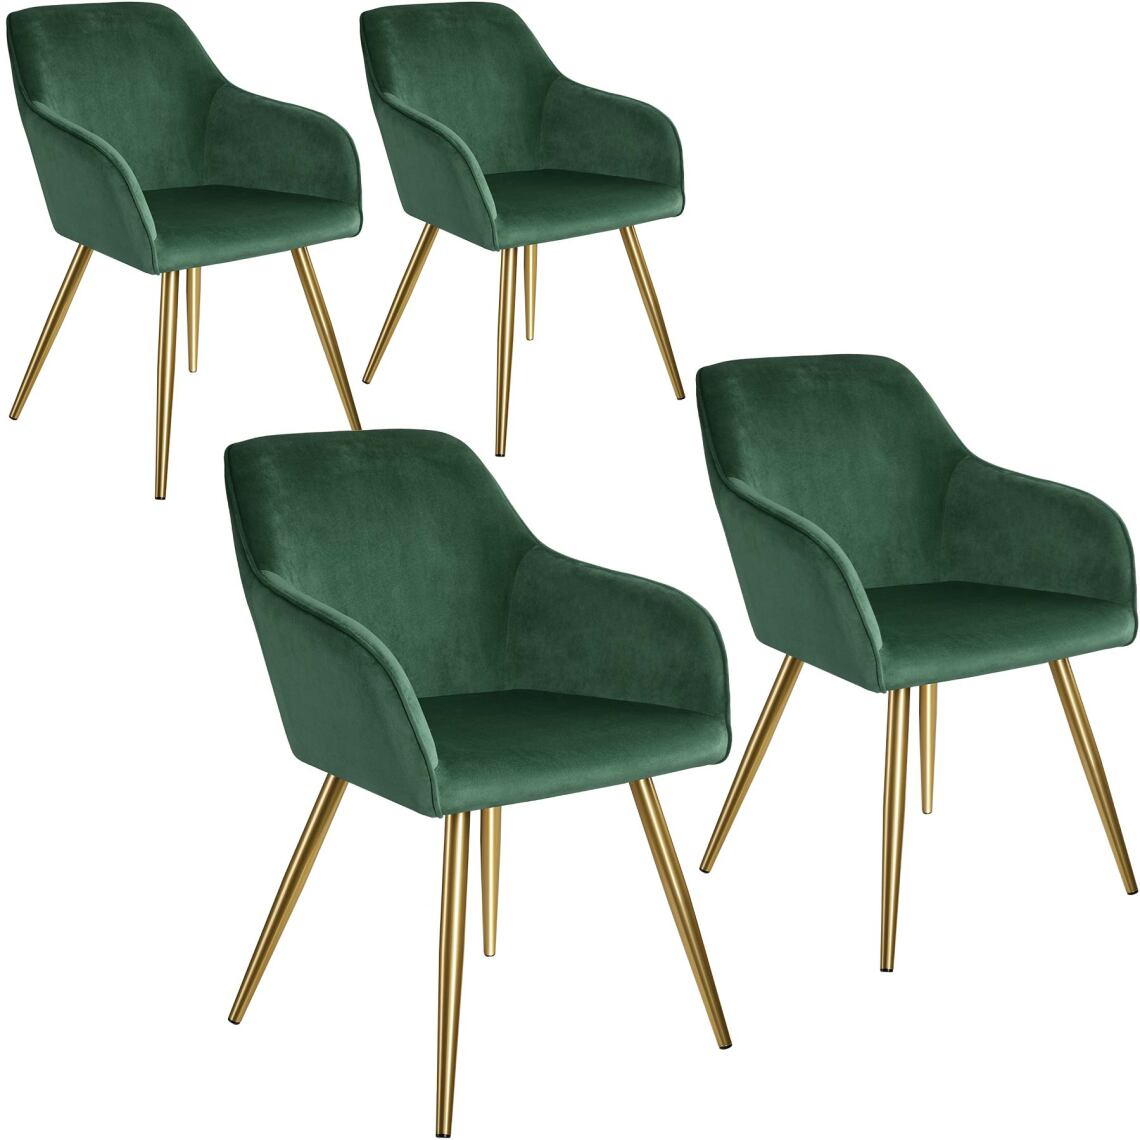 Tectake - 4 Chaises MARILYN Effet Velours Style Scandinave - vert foncé/or - Chaises